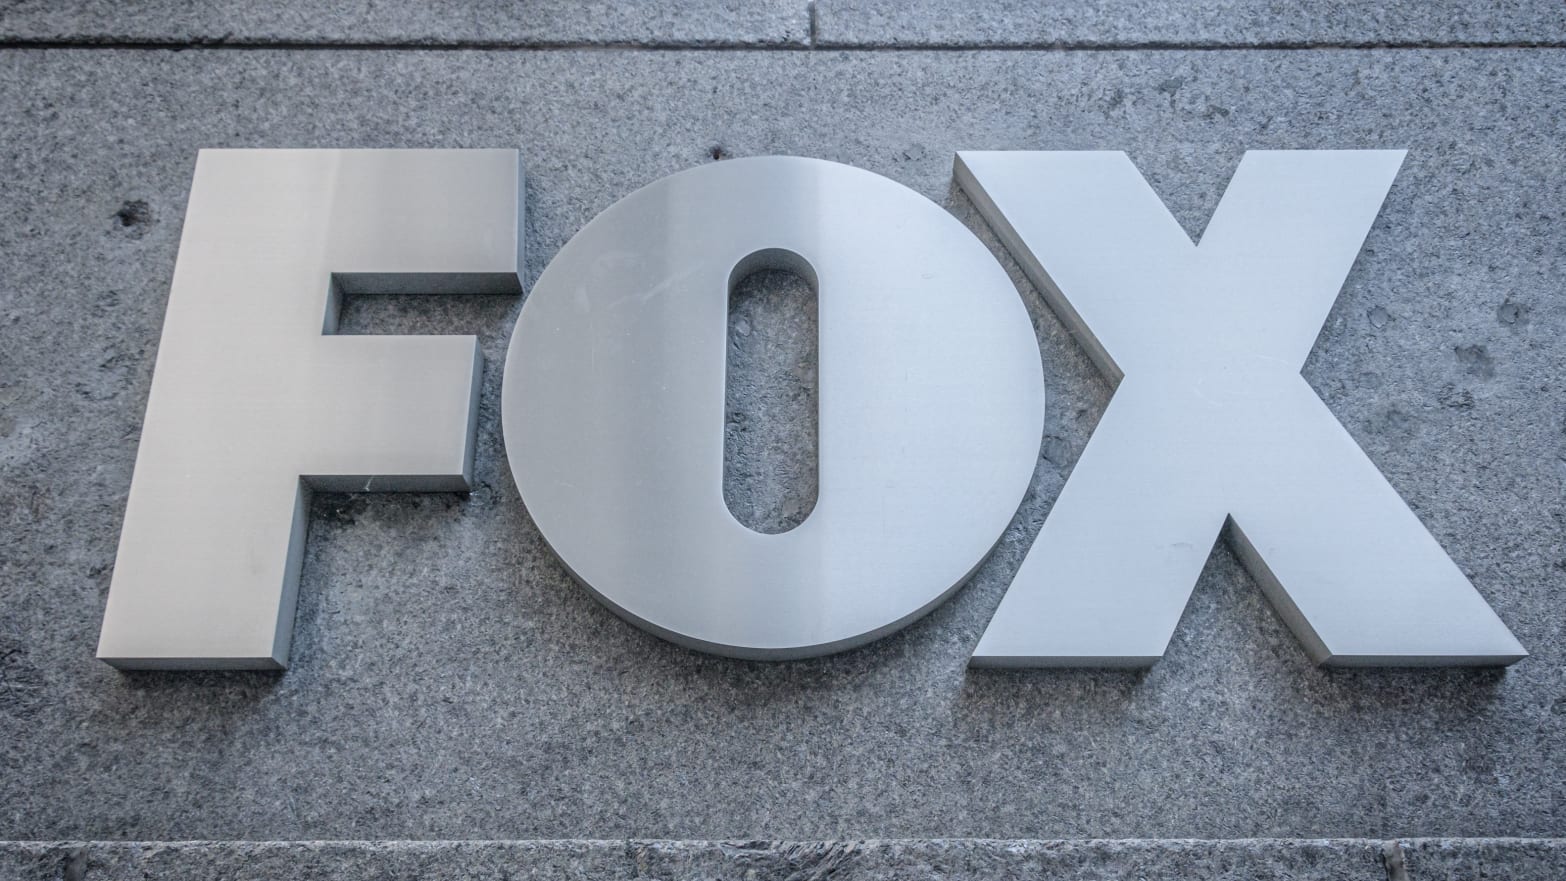 Fox recently filed an opposition to a petition to deny a local station its broadcast license.